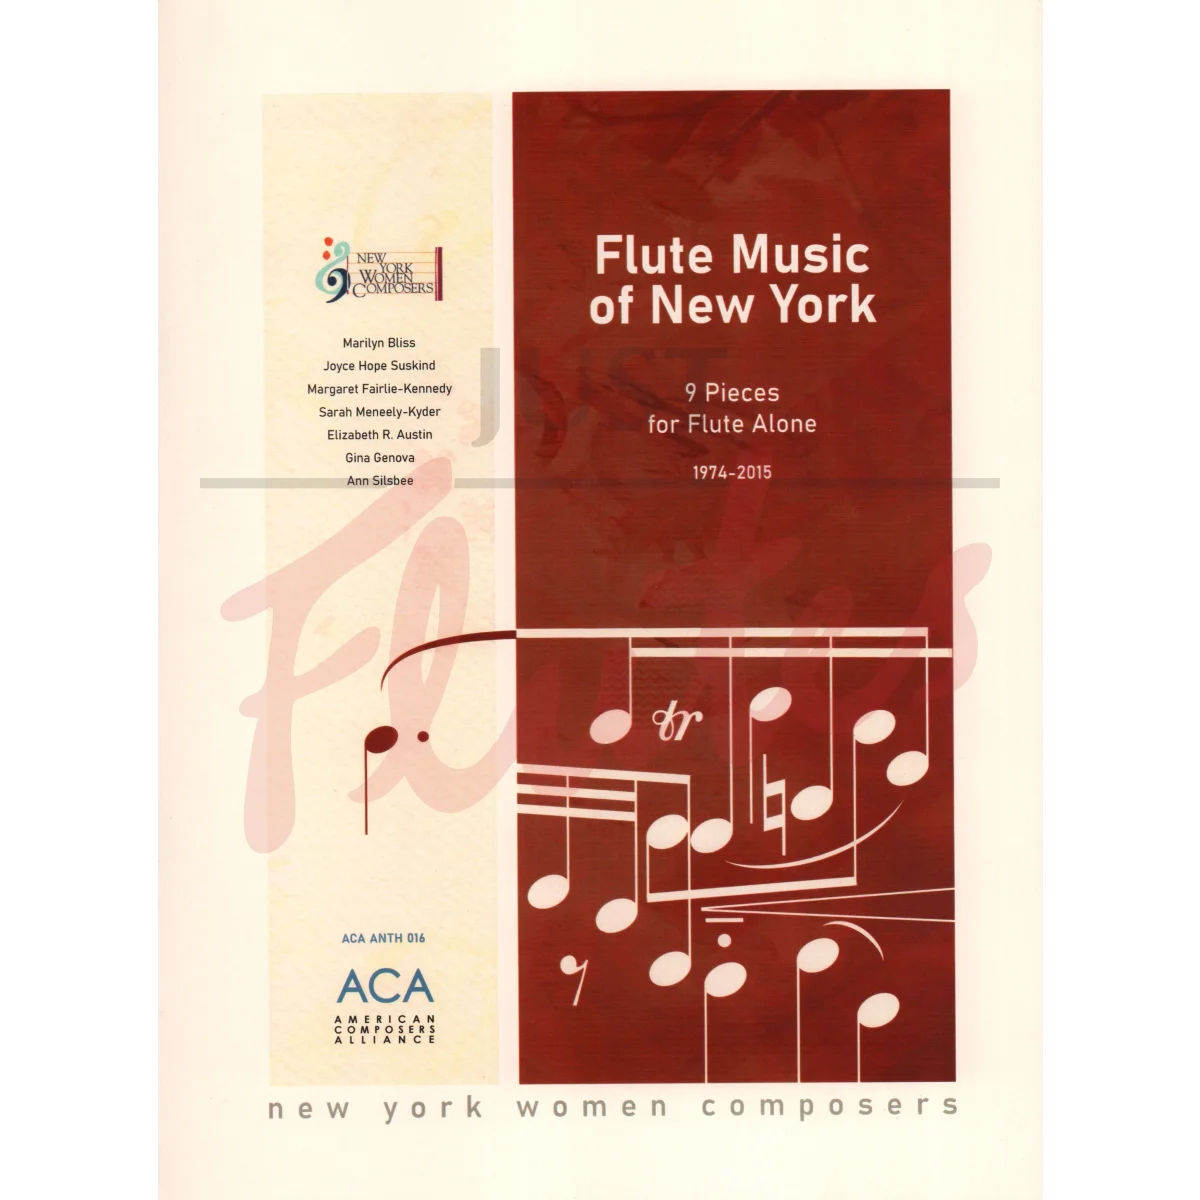 Flute Music of New York: 9 Pieces for Flute Alone